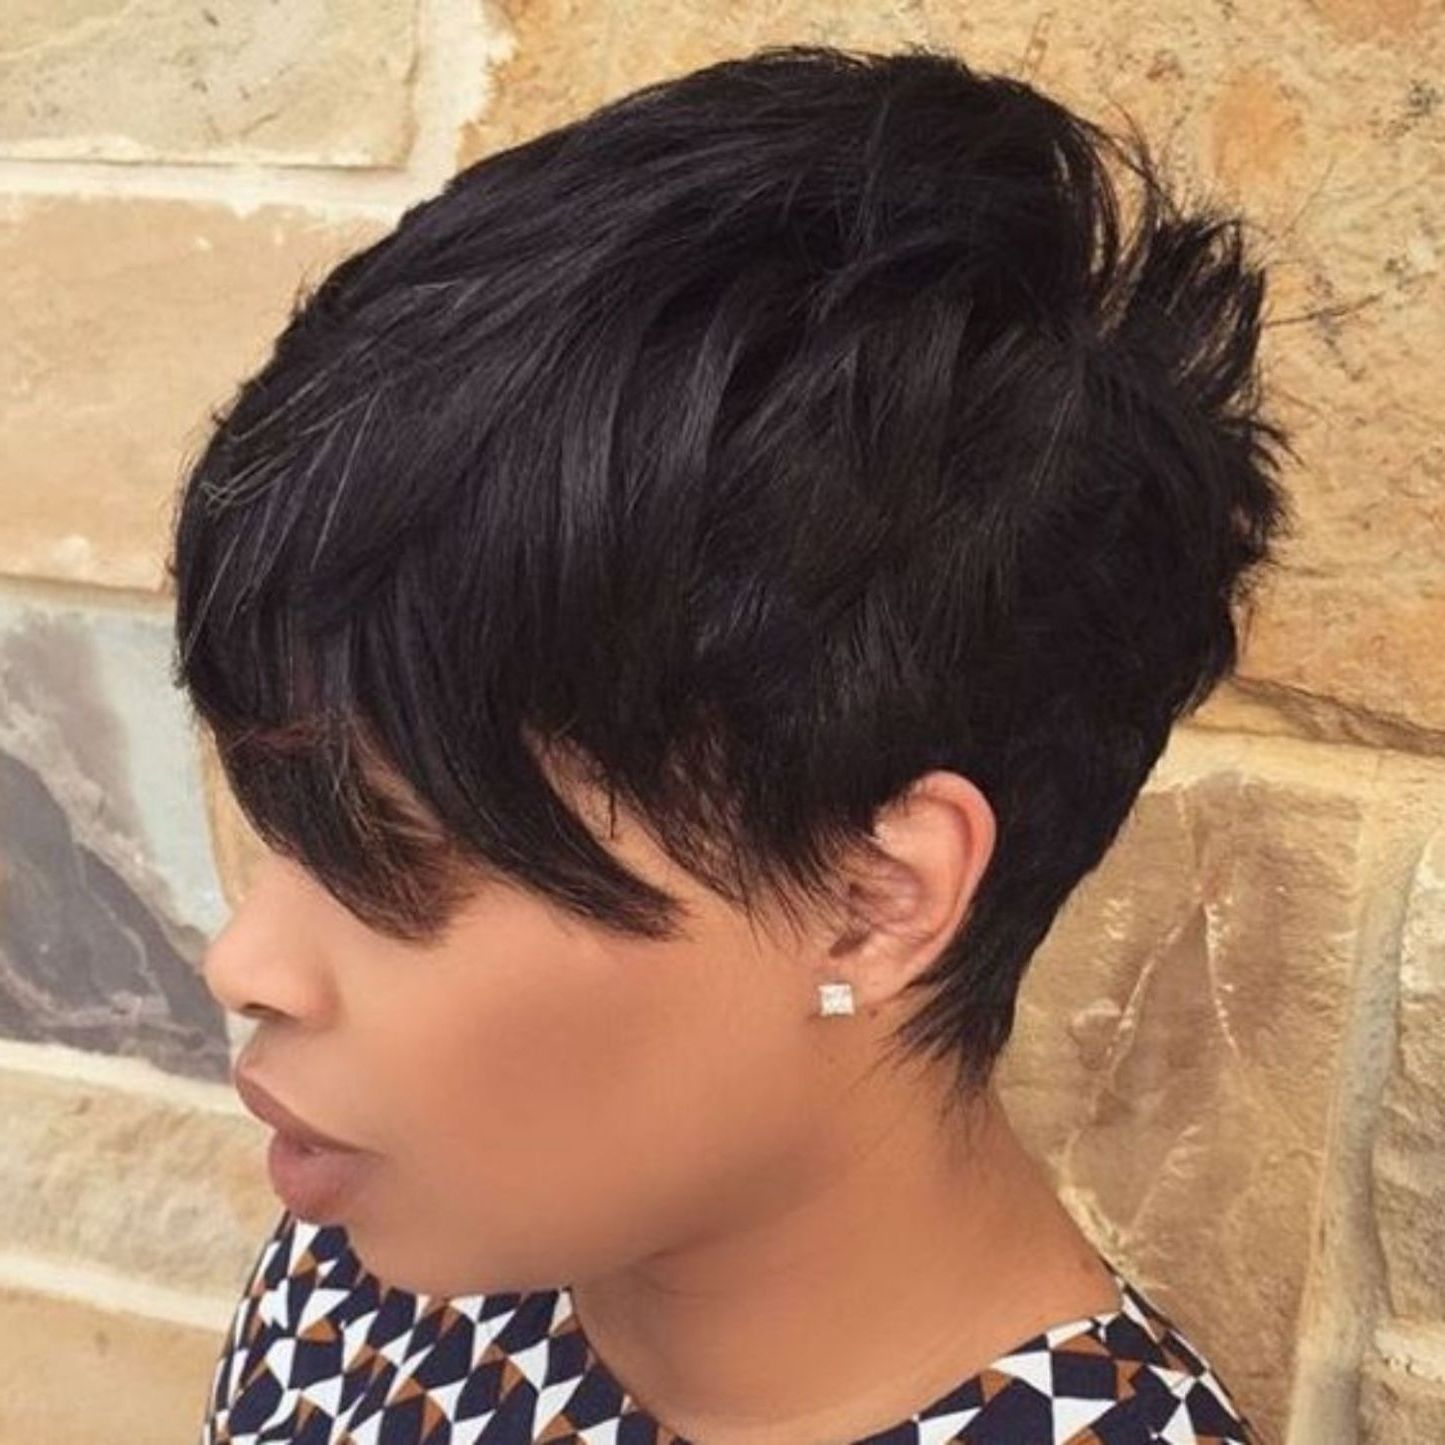 60 Great Short Hairstyles For Black Women | Hair Styles | Pinterest With Regard To 2018 Choppy Asymmetrical Black Pixie Haircuts (Photo 14 of 15)